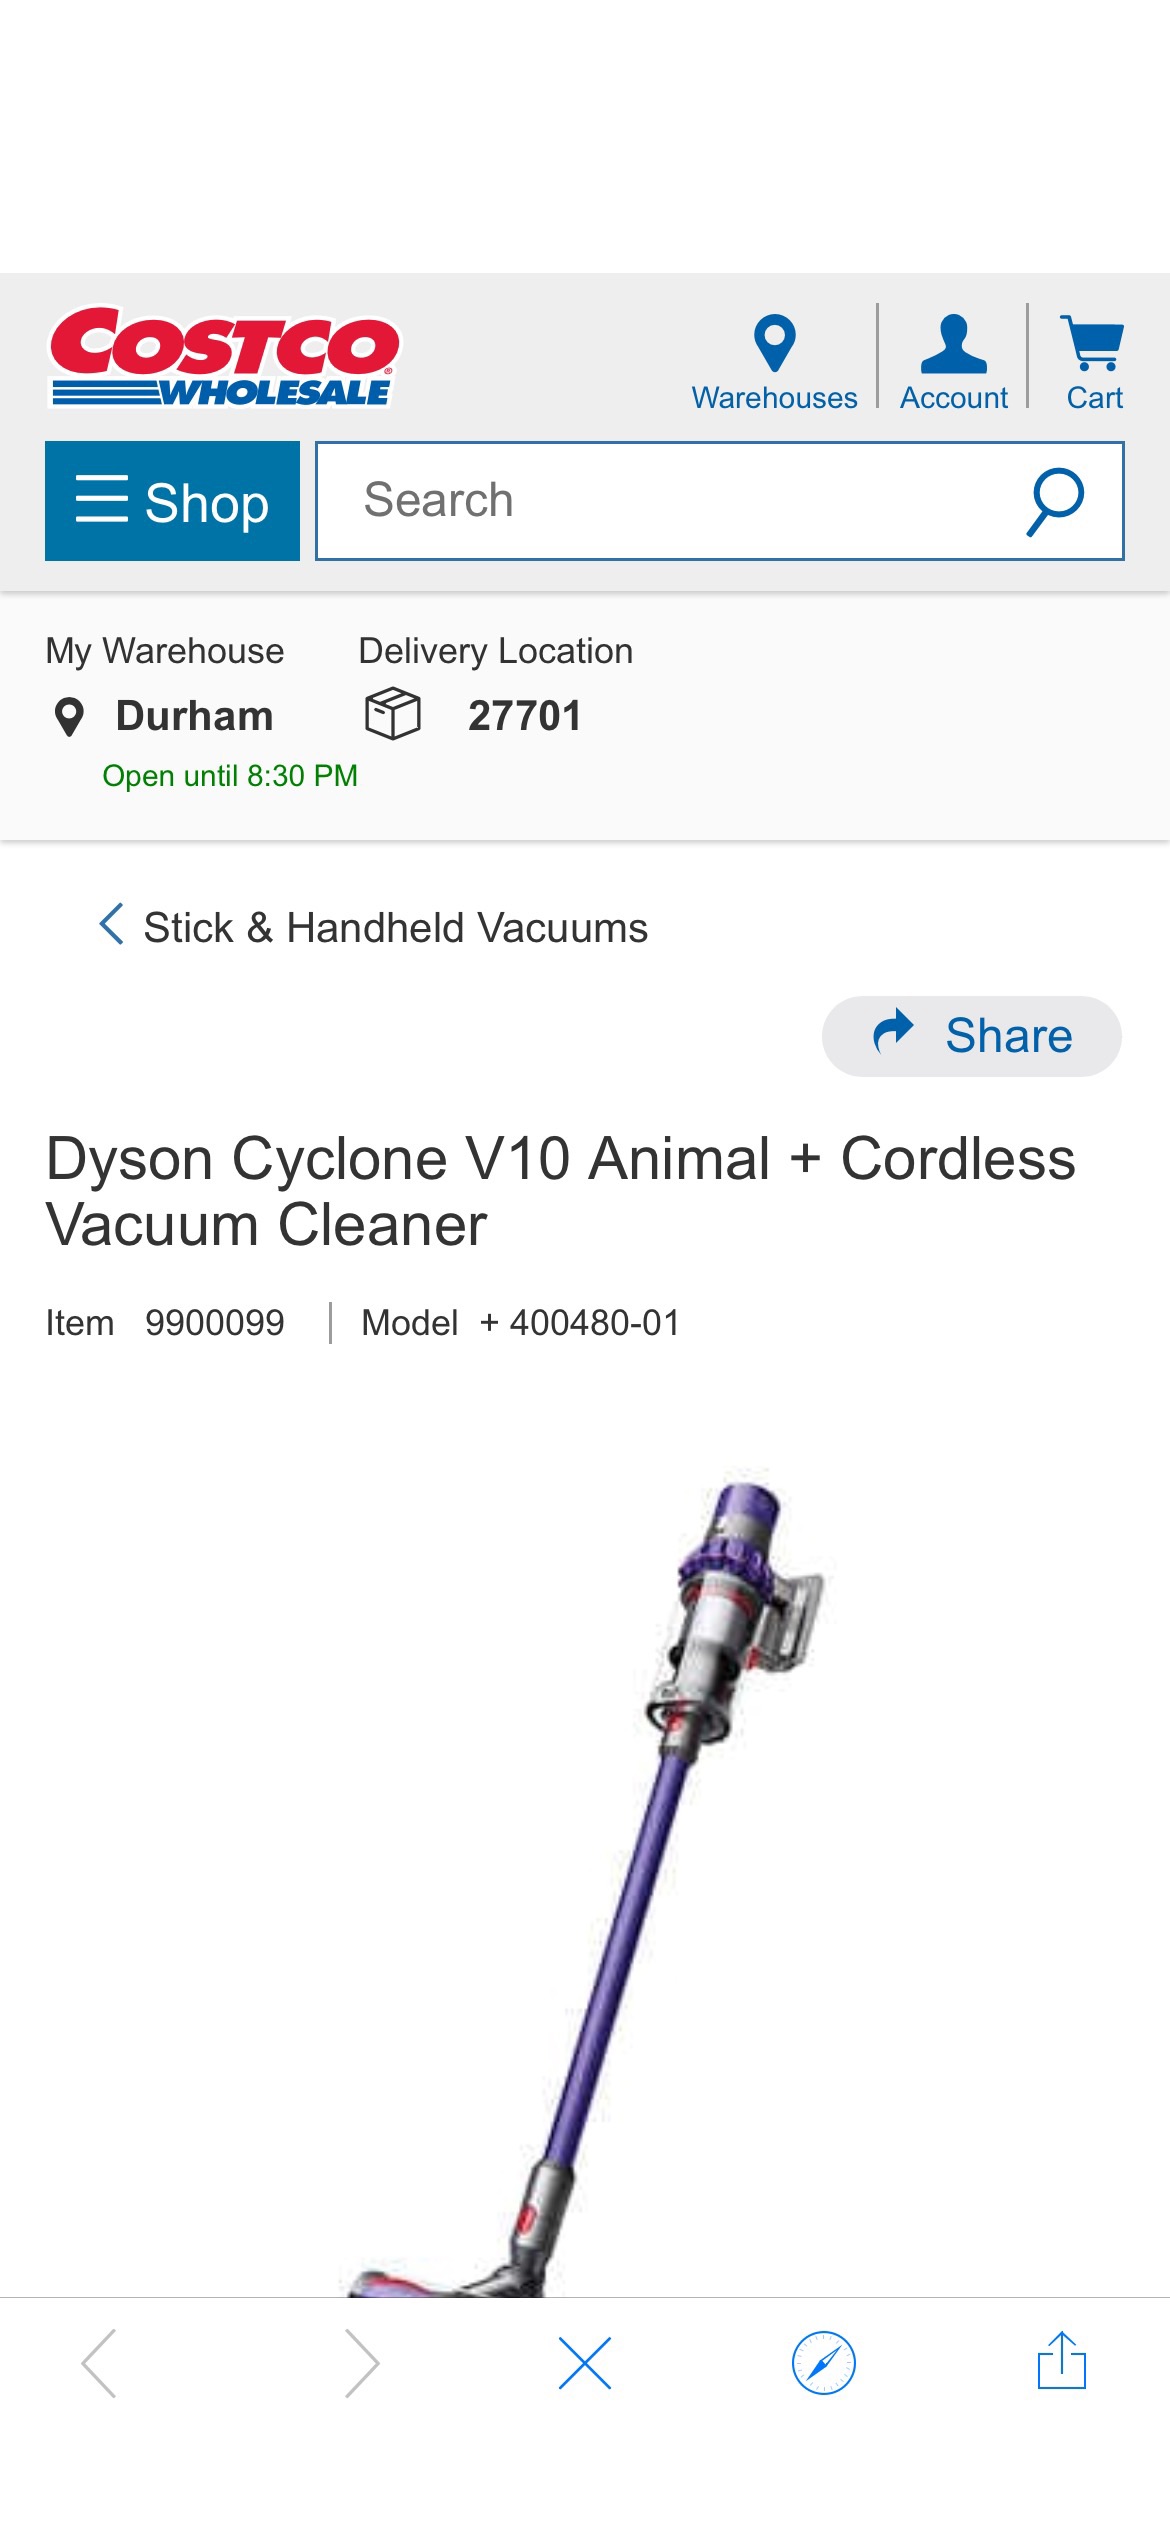 Dyson Cyclone V10 Animal + Cordless Vacuum Cleaner | Costco